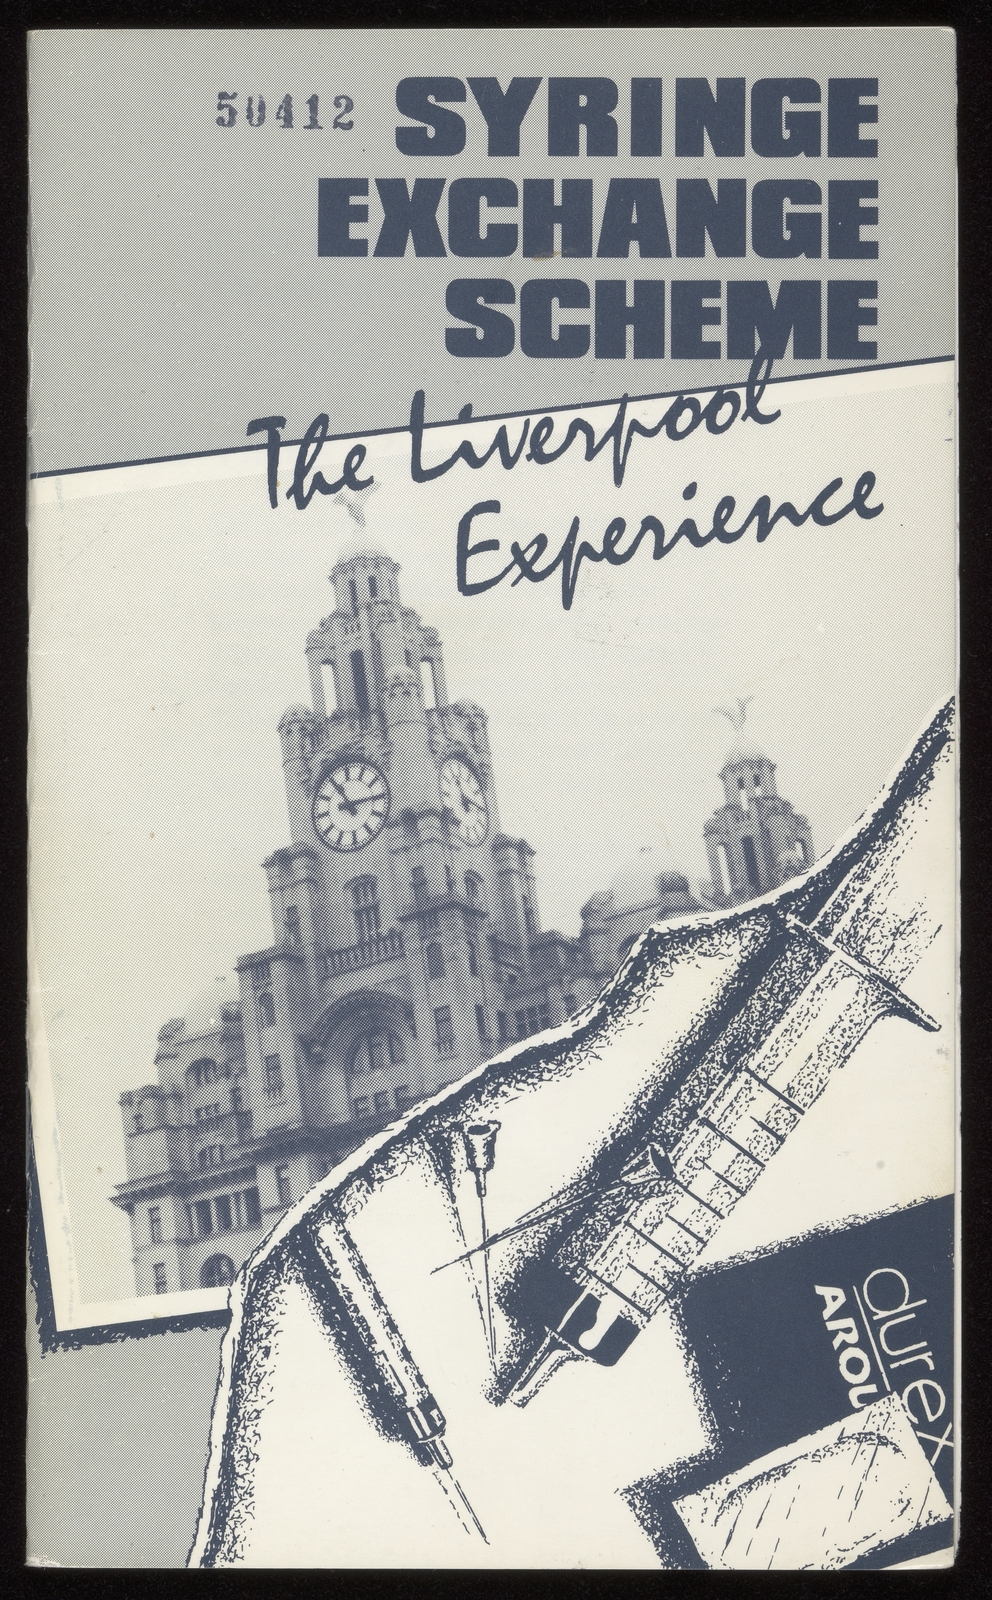 Black and white front cover of a pamphlet, featuring an image of municipal building, a syringe and needles, and a condom packet.